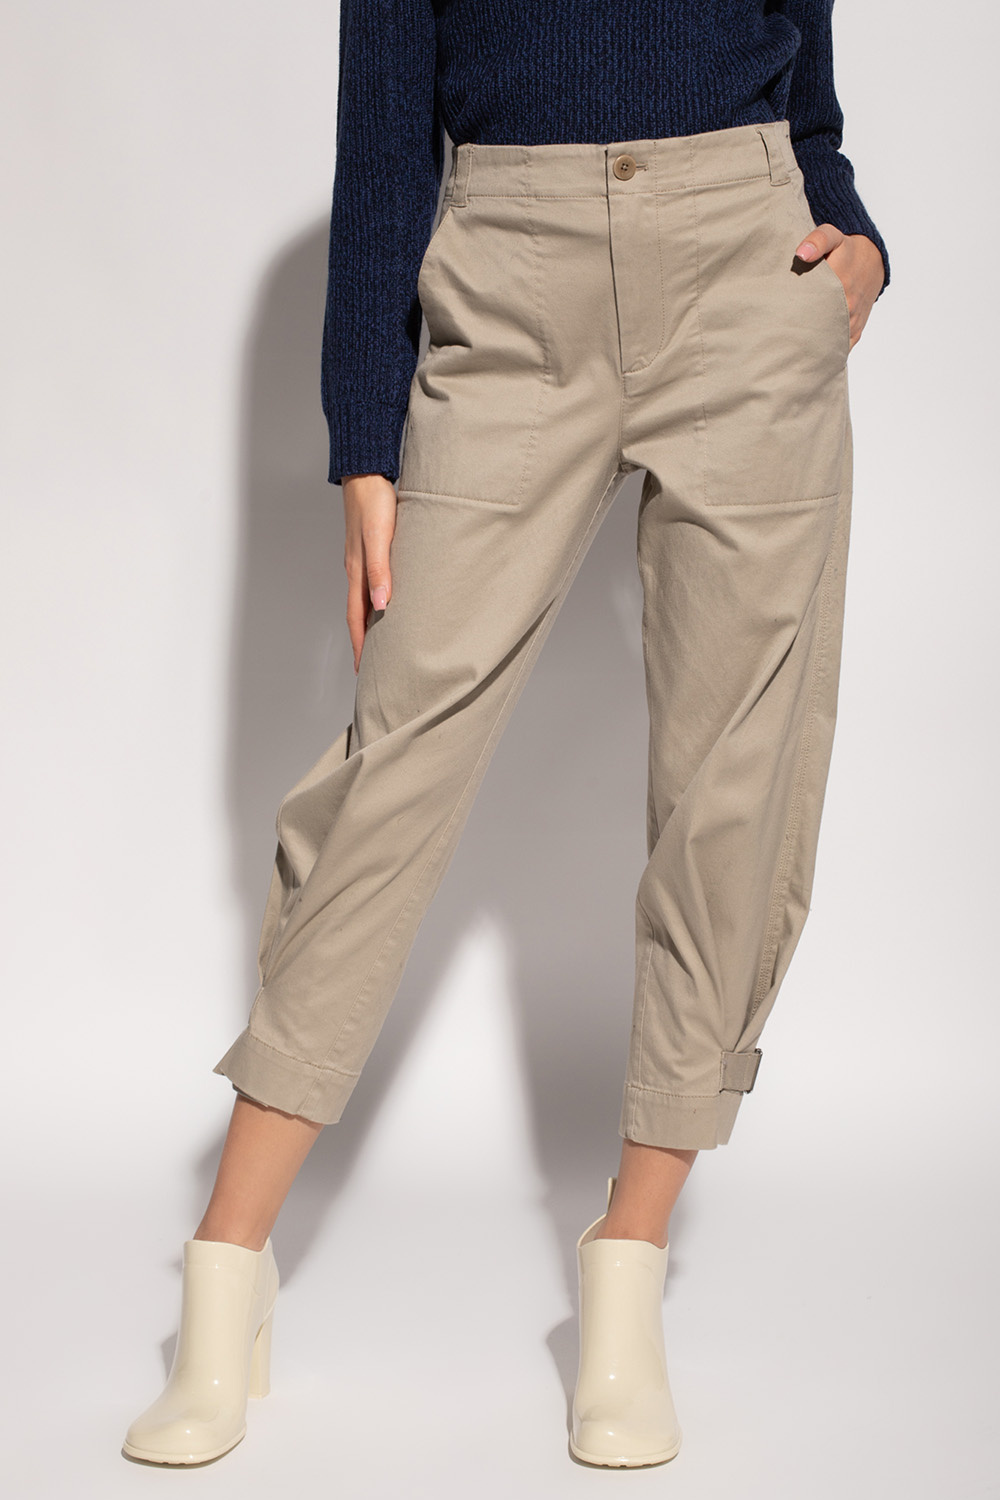 proenza mit Schouler White Label Trousers with pockets